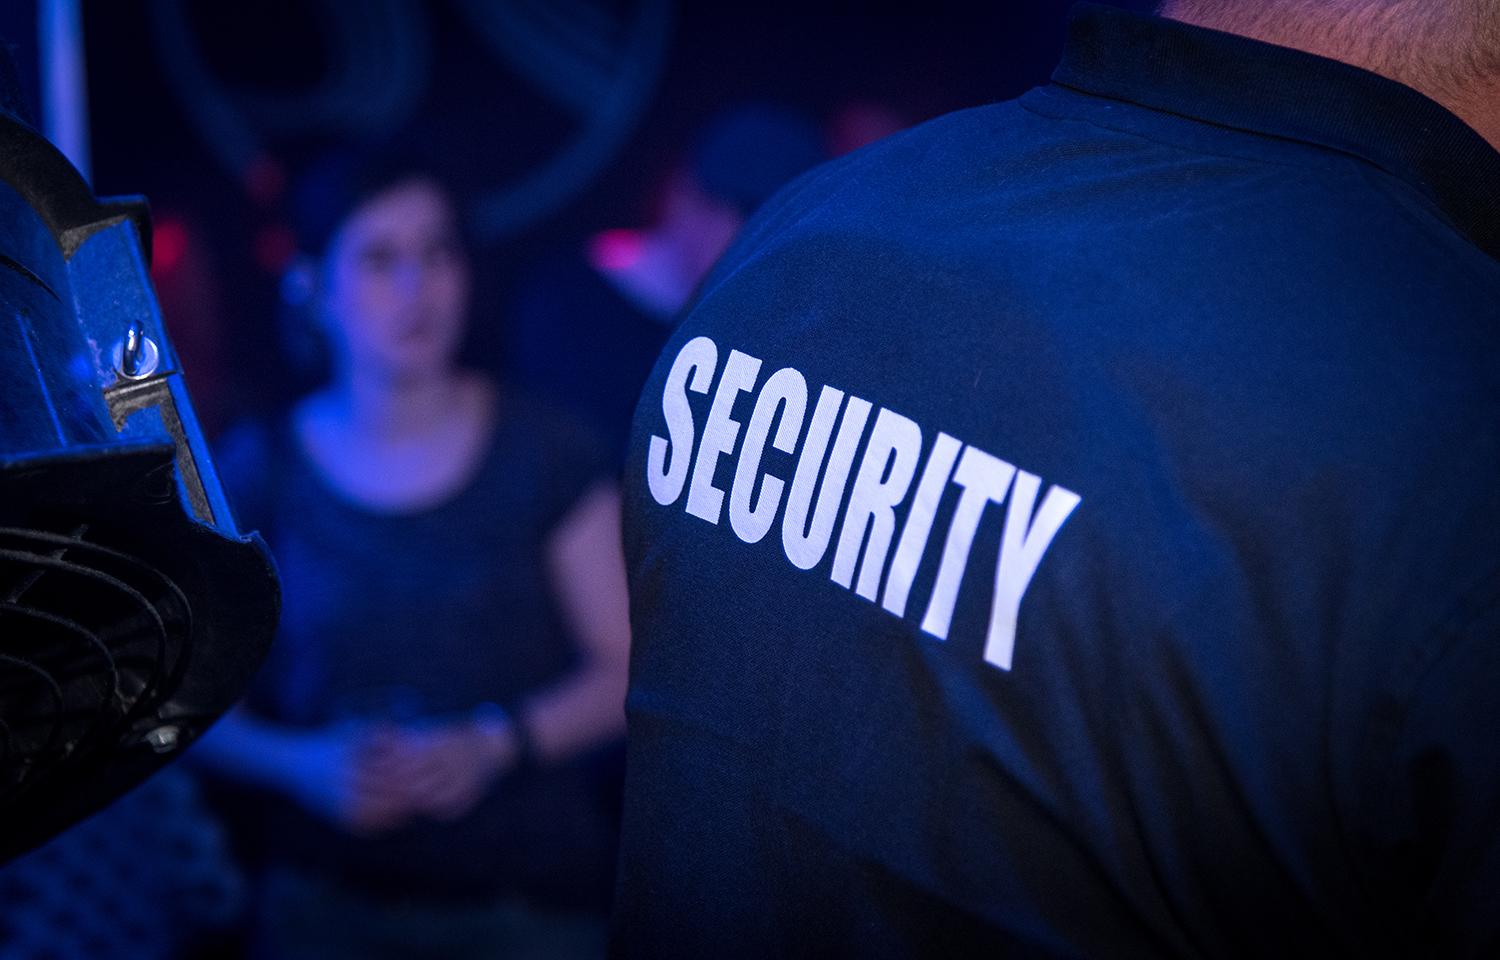 British Security Industry Association Data Shows Increased Demand for Security Officers 